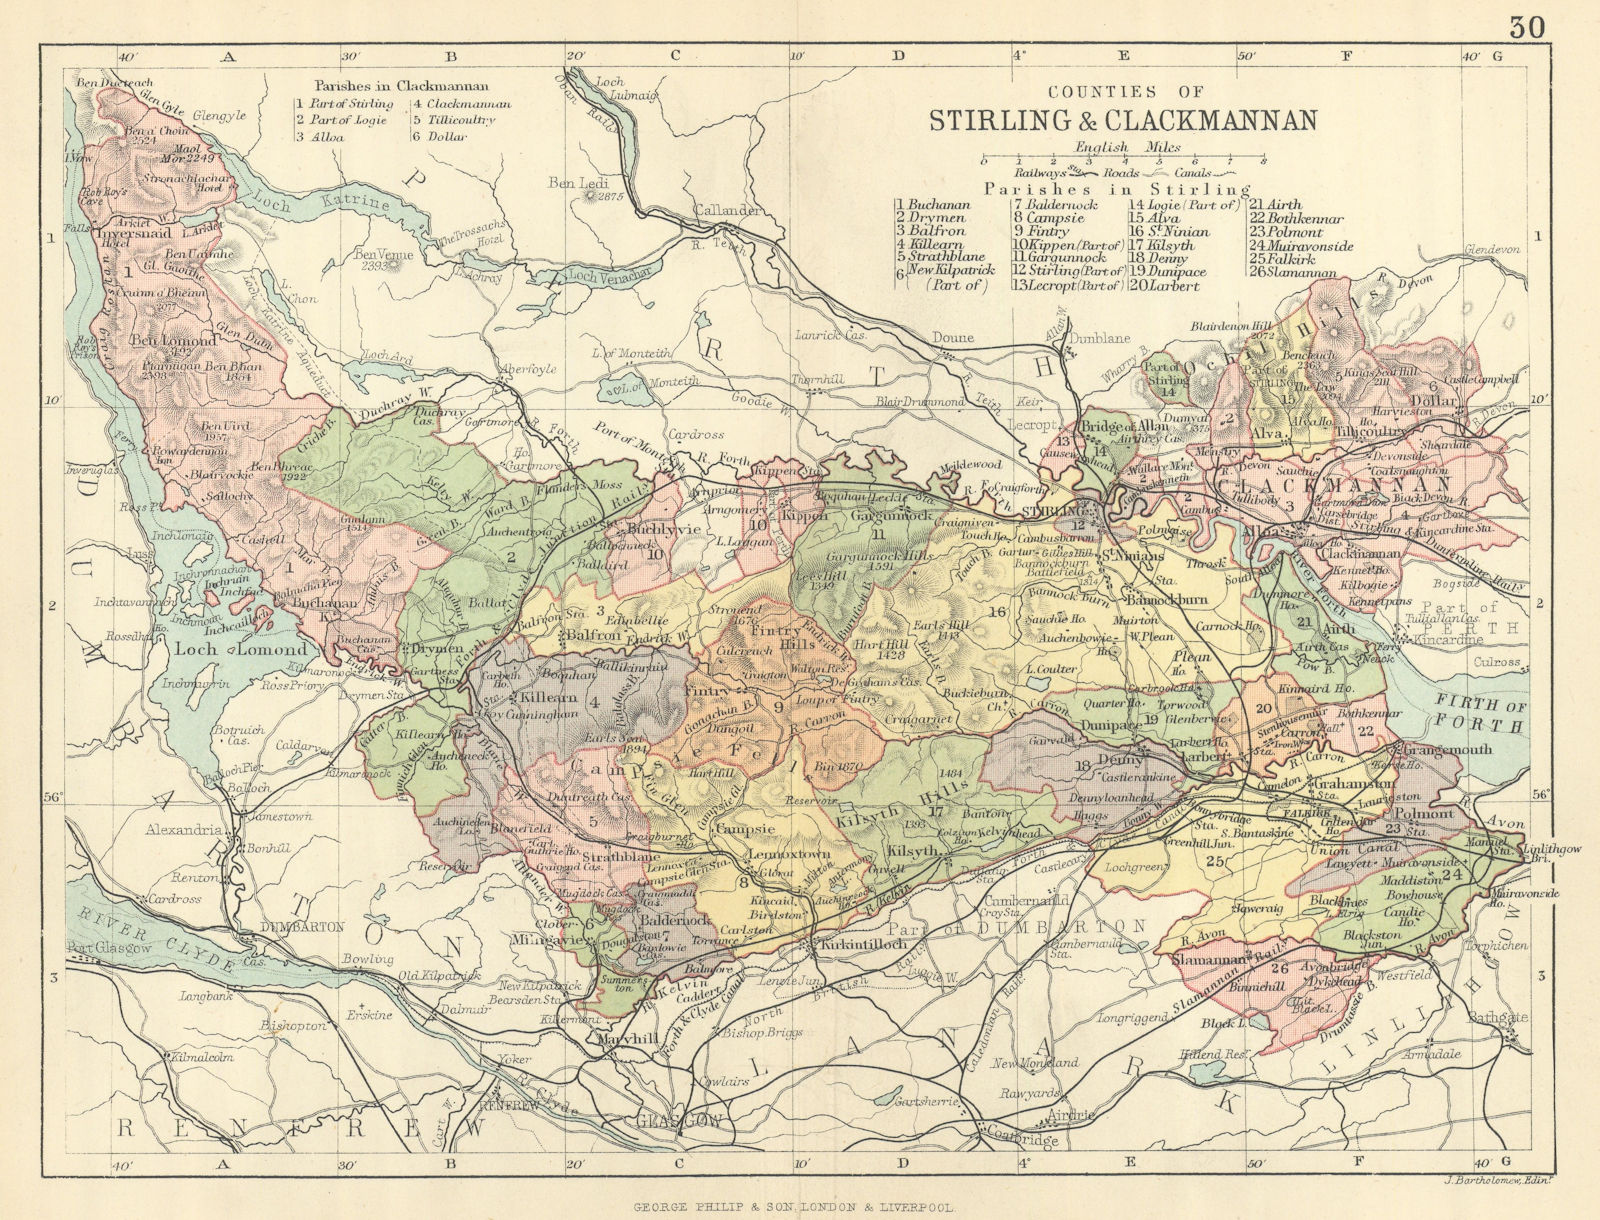 Associate Product Stirlingshire & Clackmannanshire counties. BARTHOLOMEW 1886 old antique map